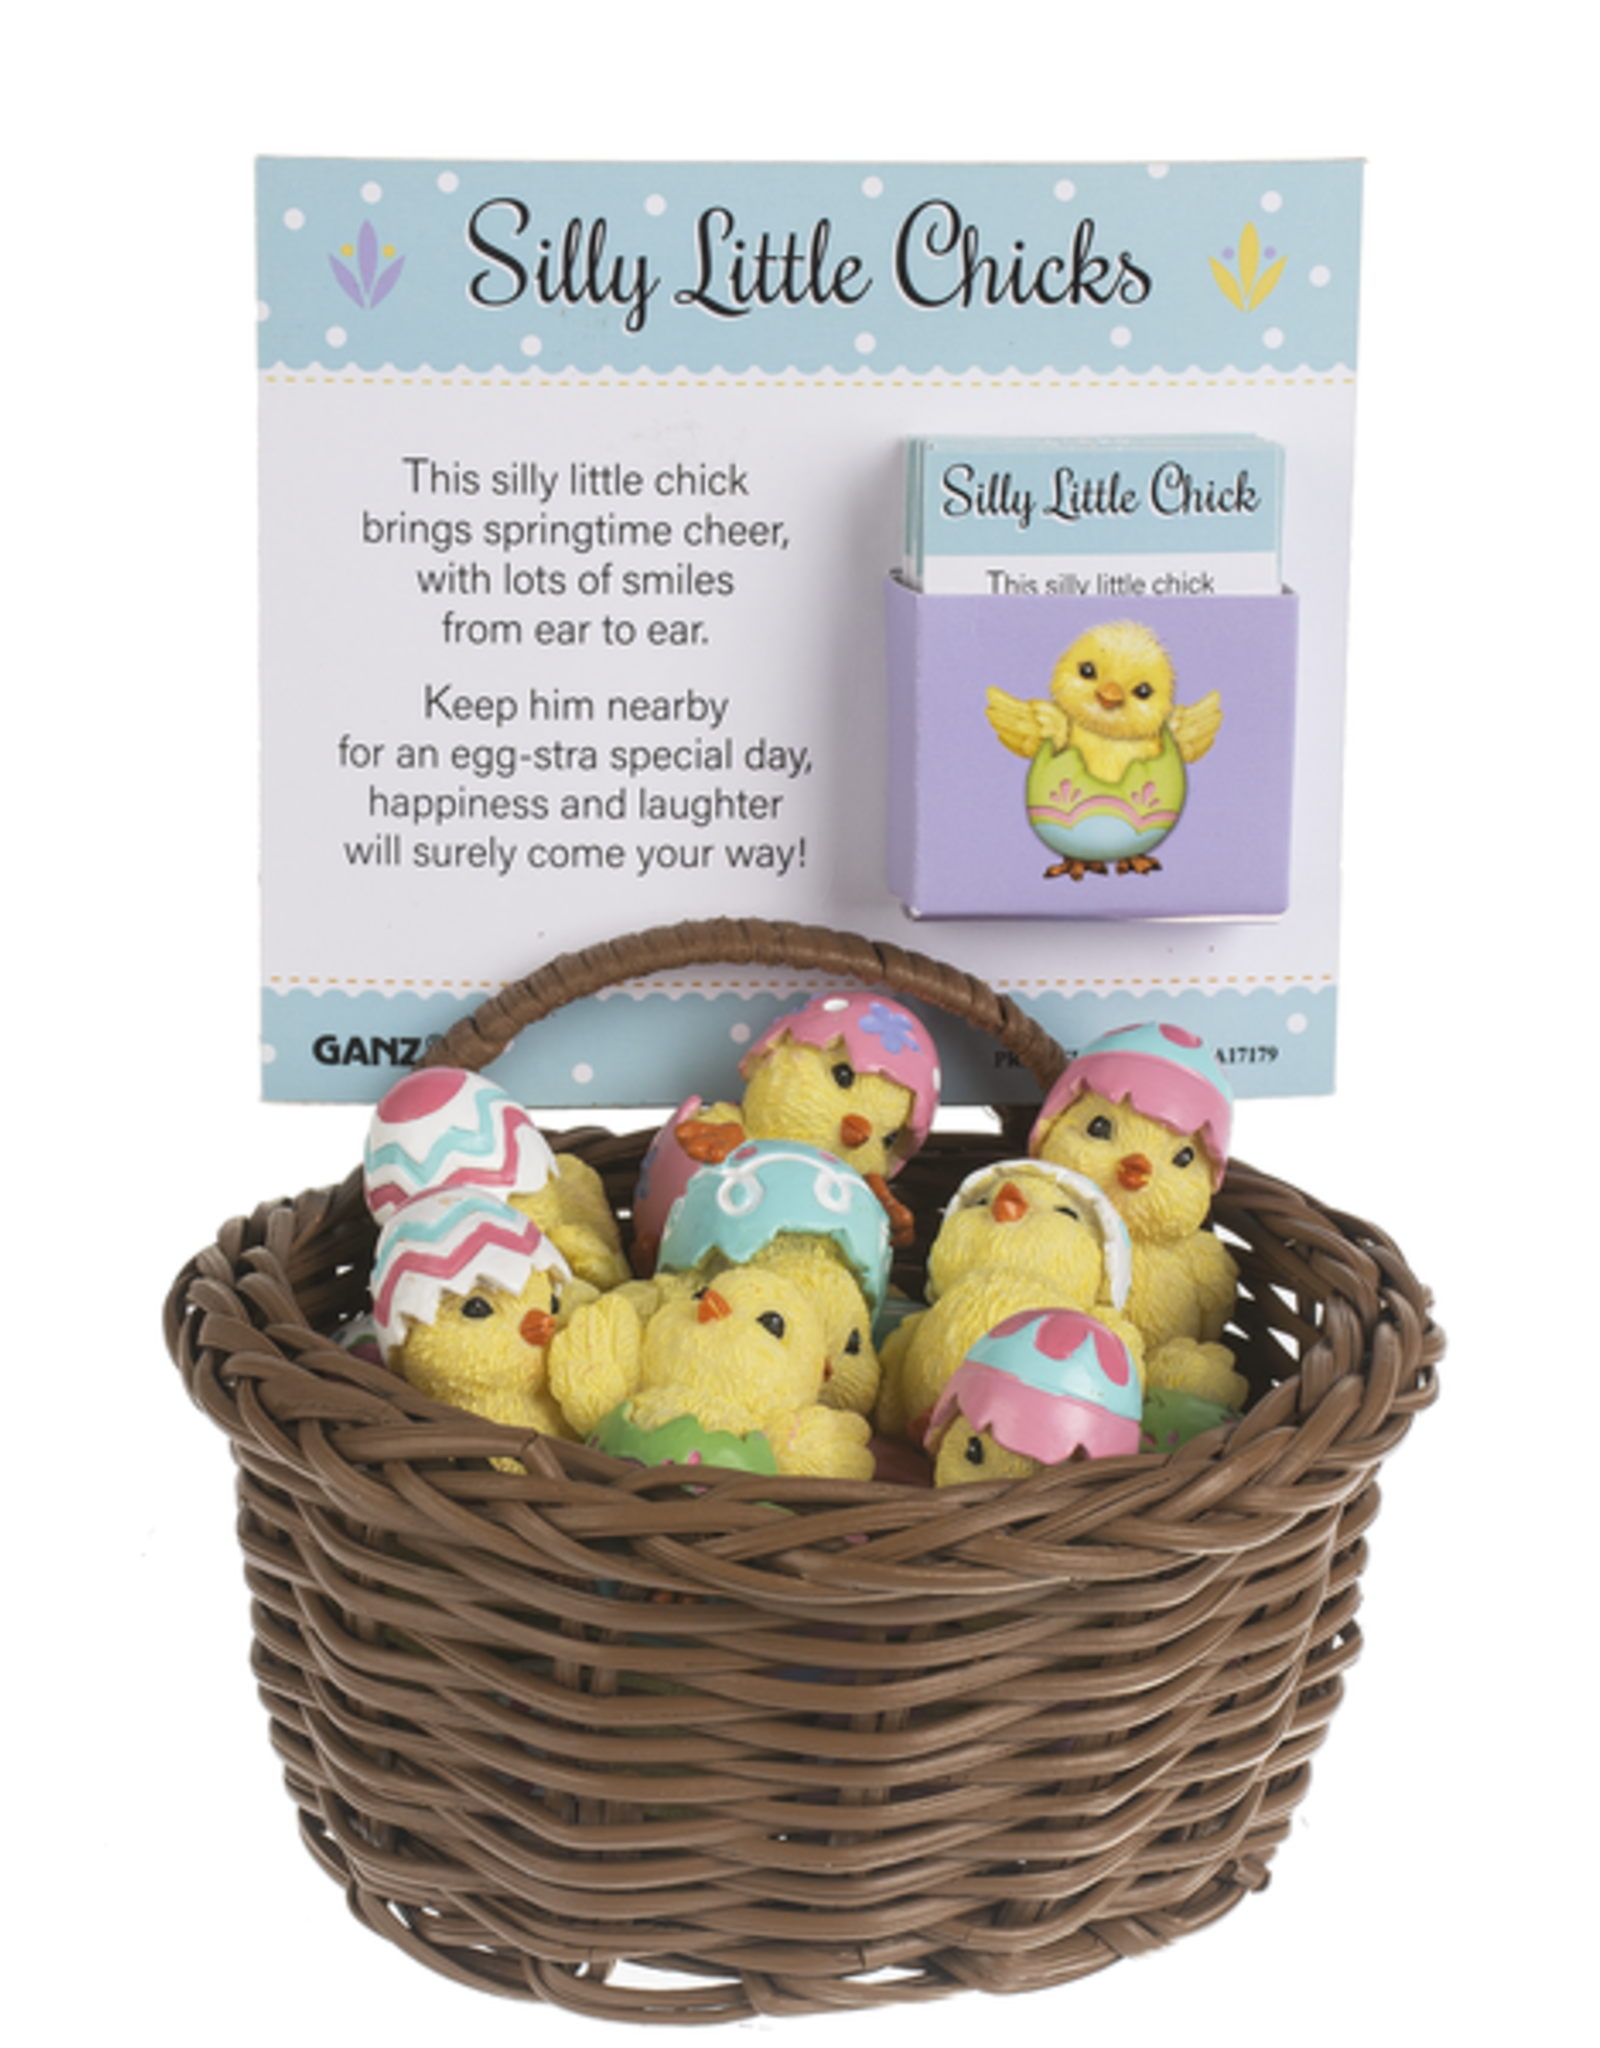 Ganz Silly Little Chicks Pocket Charms